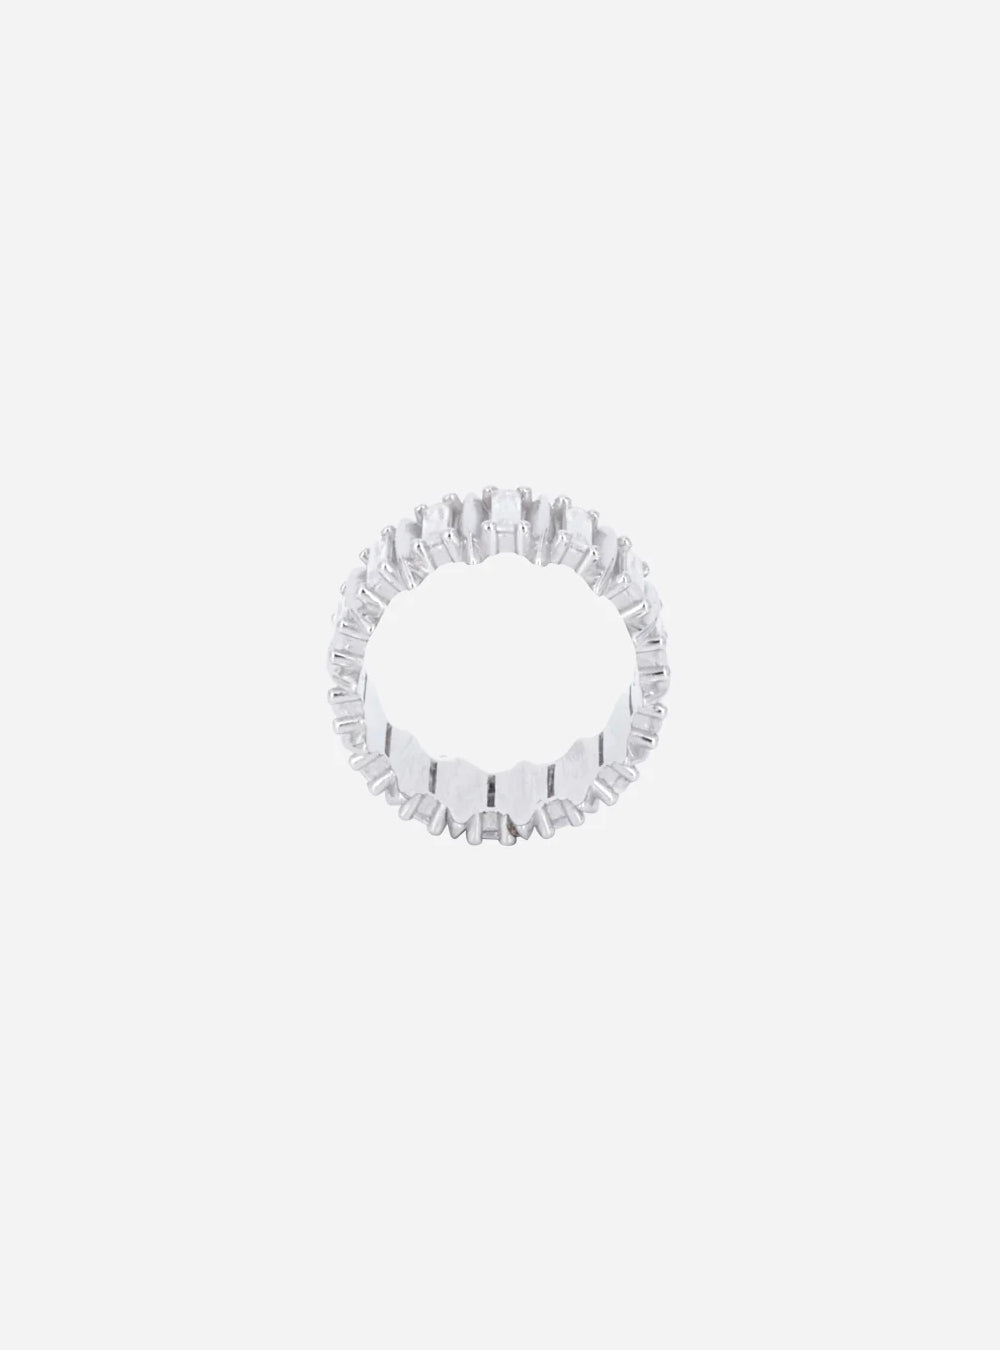 a MIDNIGHTFACTORY Talon eternity ring on a white background.